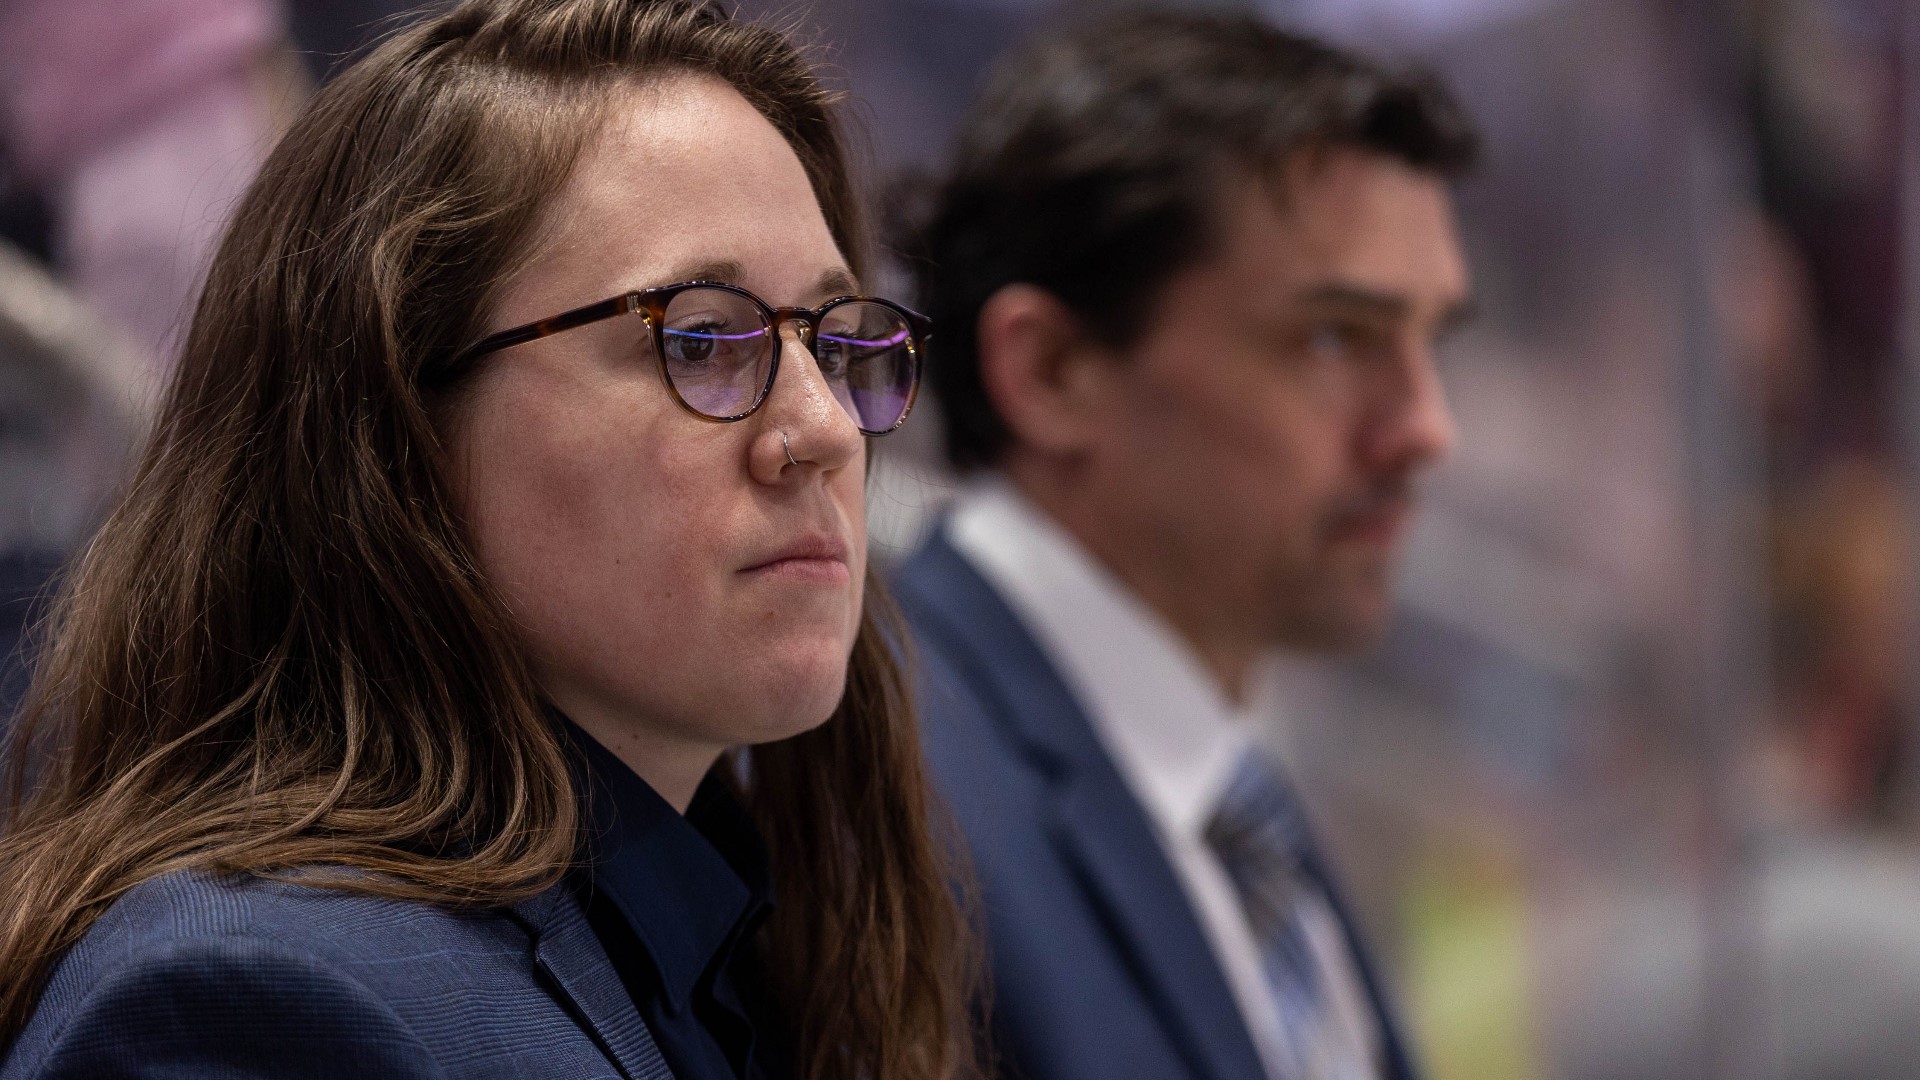 Emily Engel-Natzke is making history as she starts work as the Washington Capitals' newest video coach.